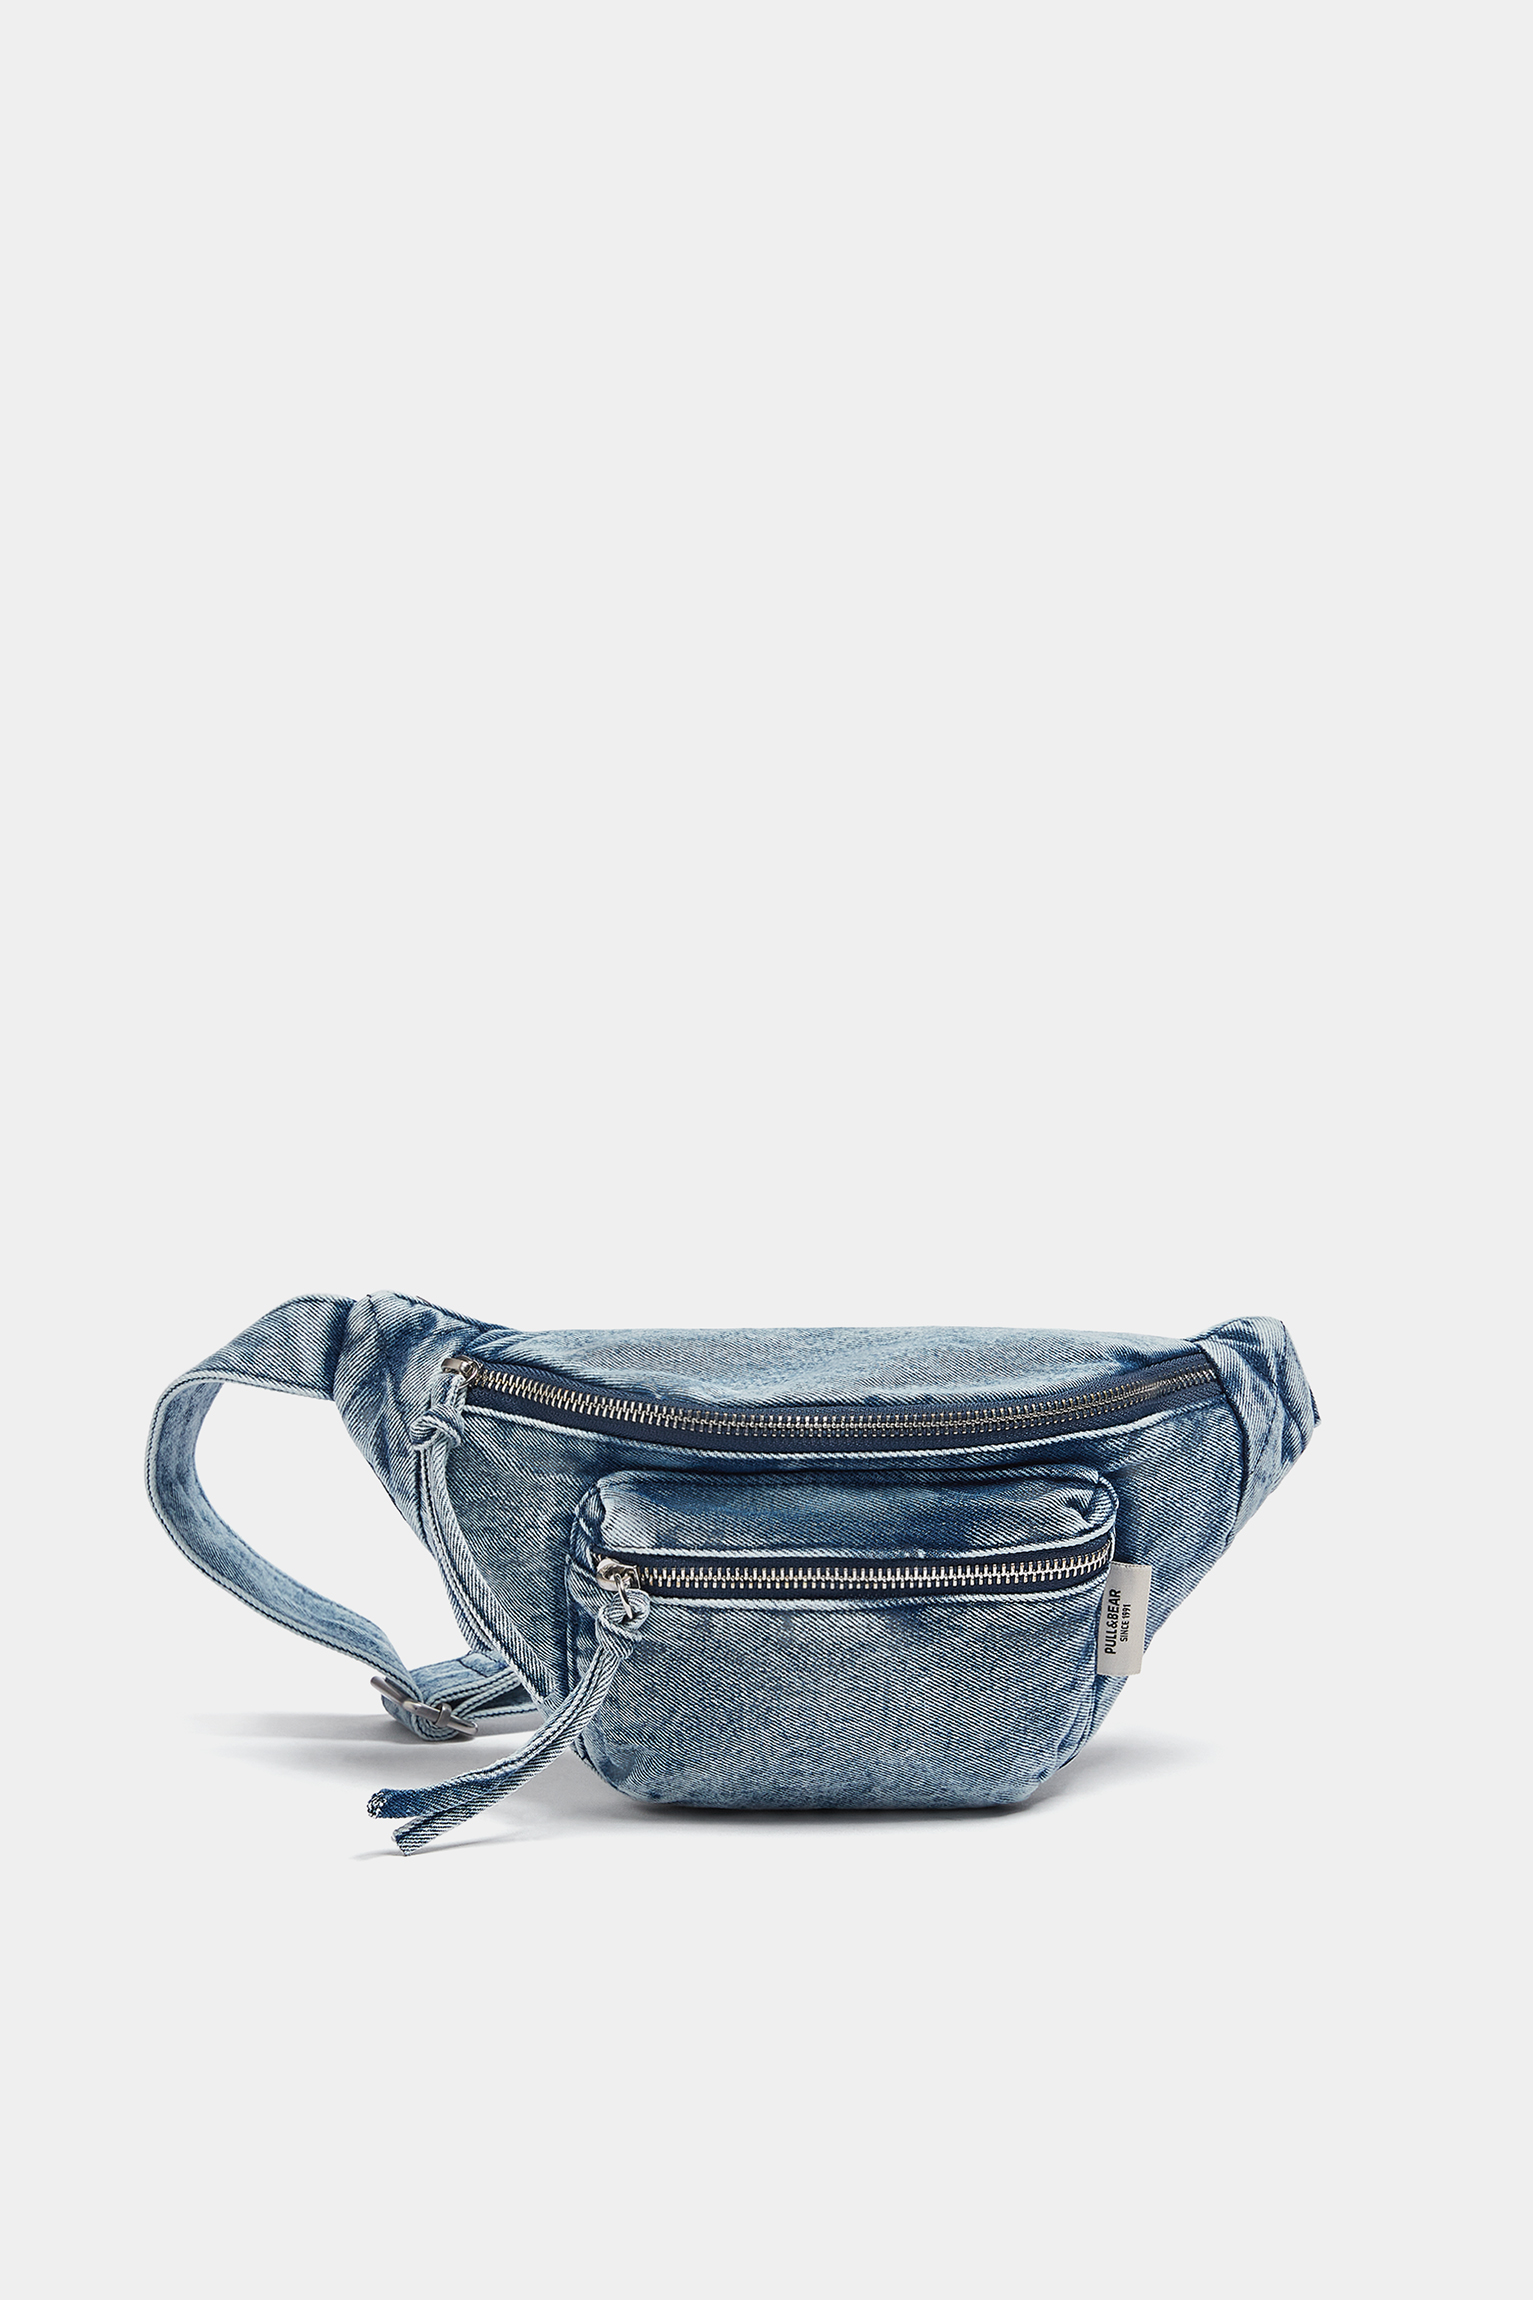 Ribbed Fanny Pack Coral – Denim & Daisy